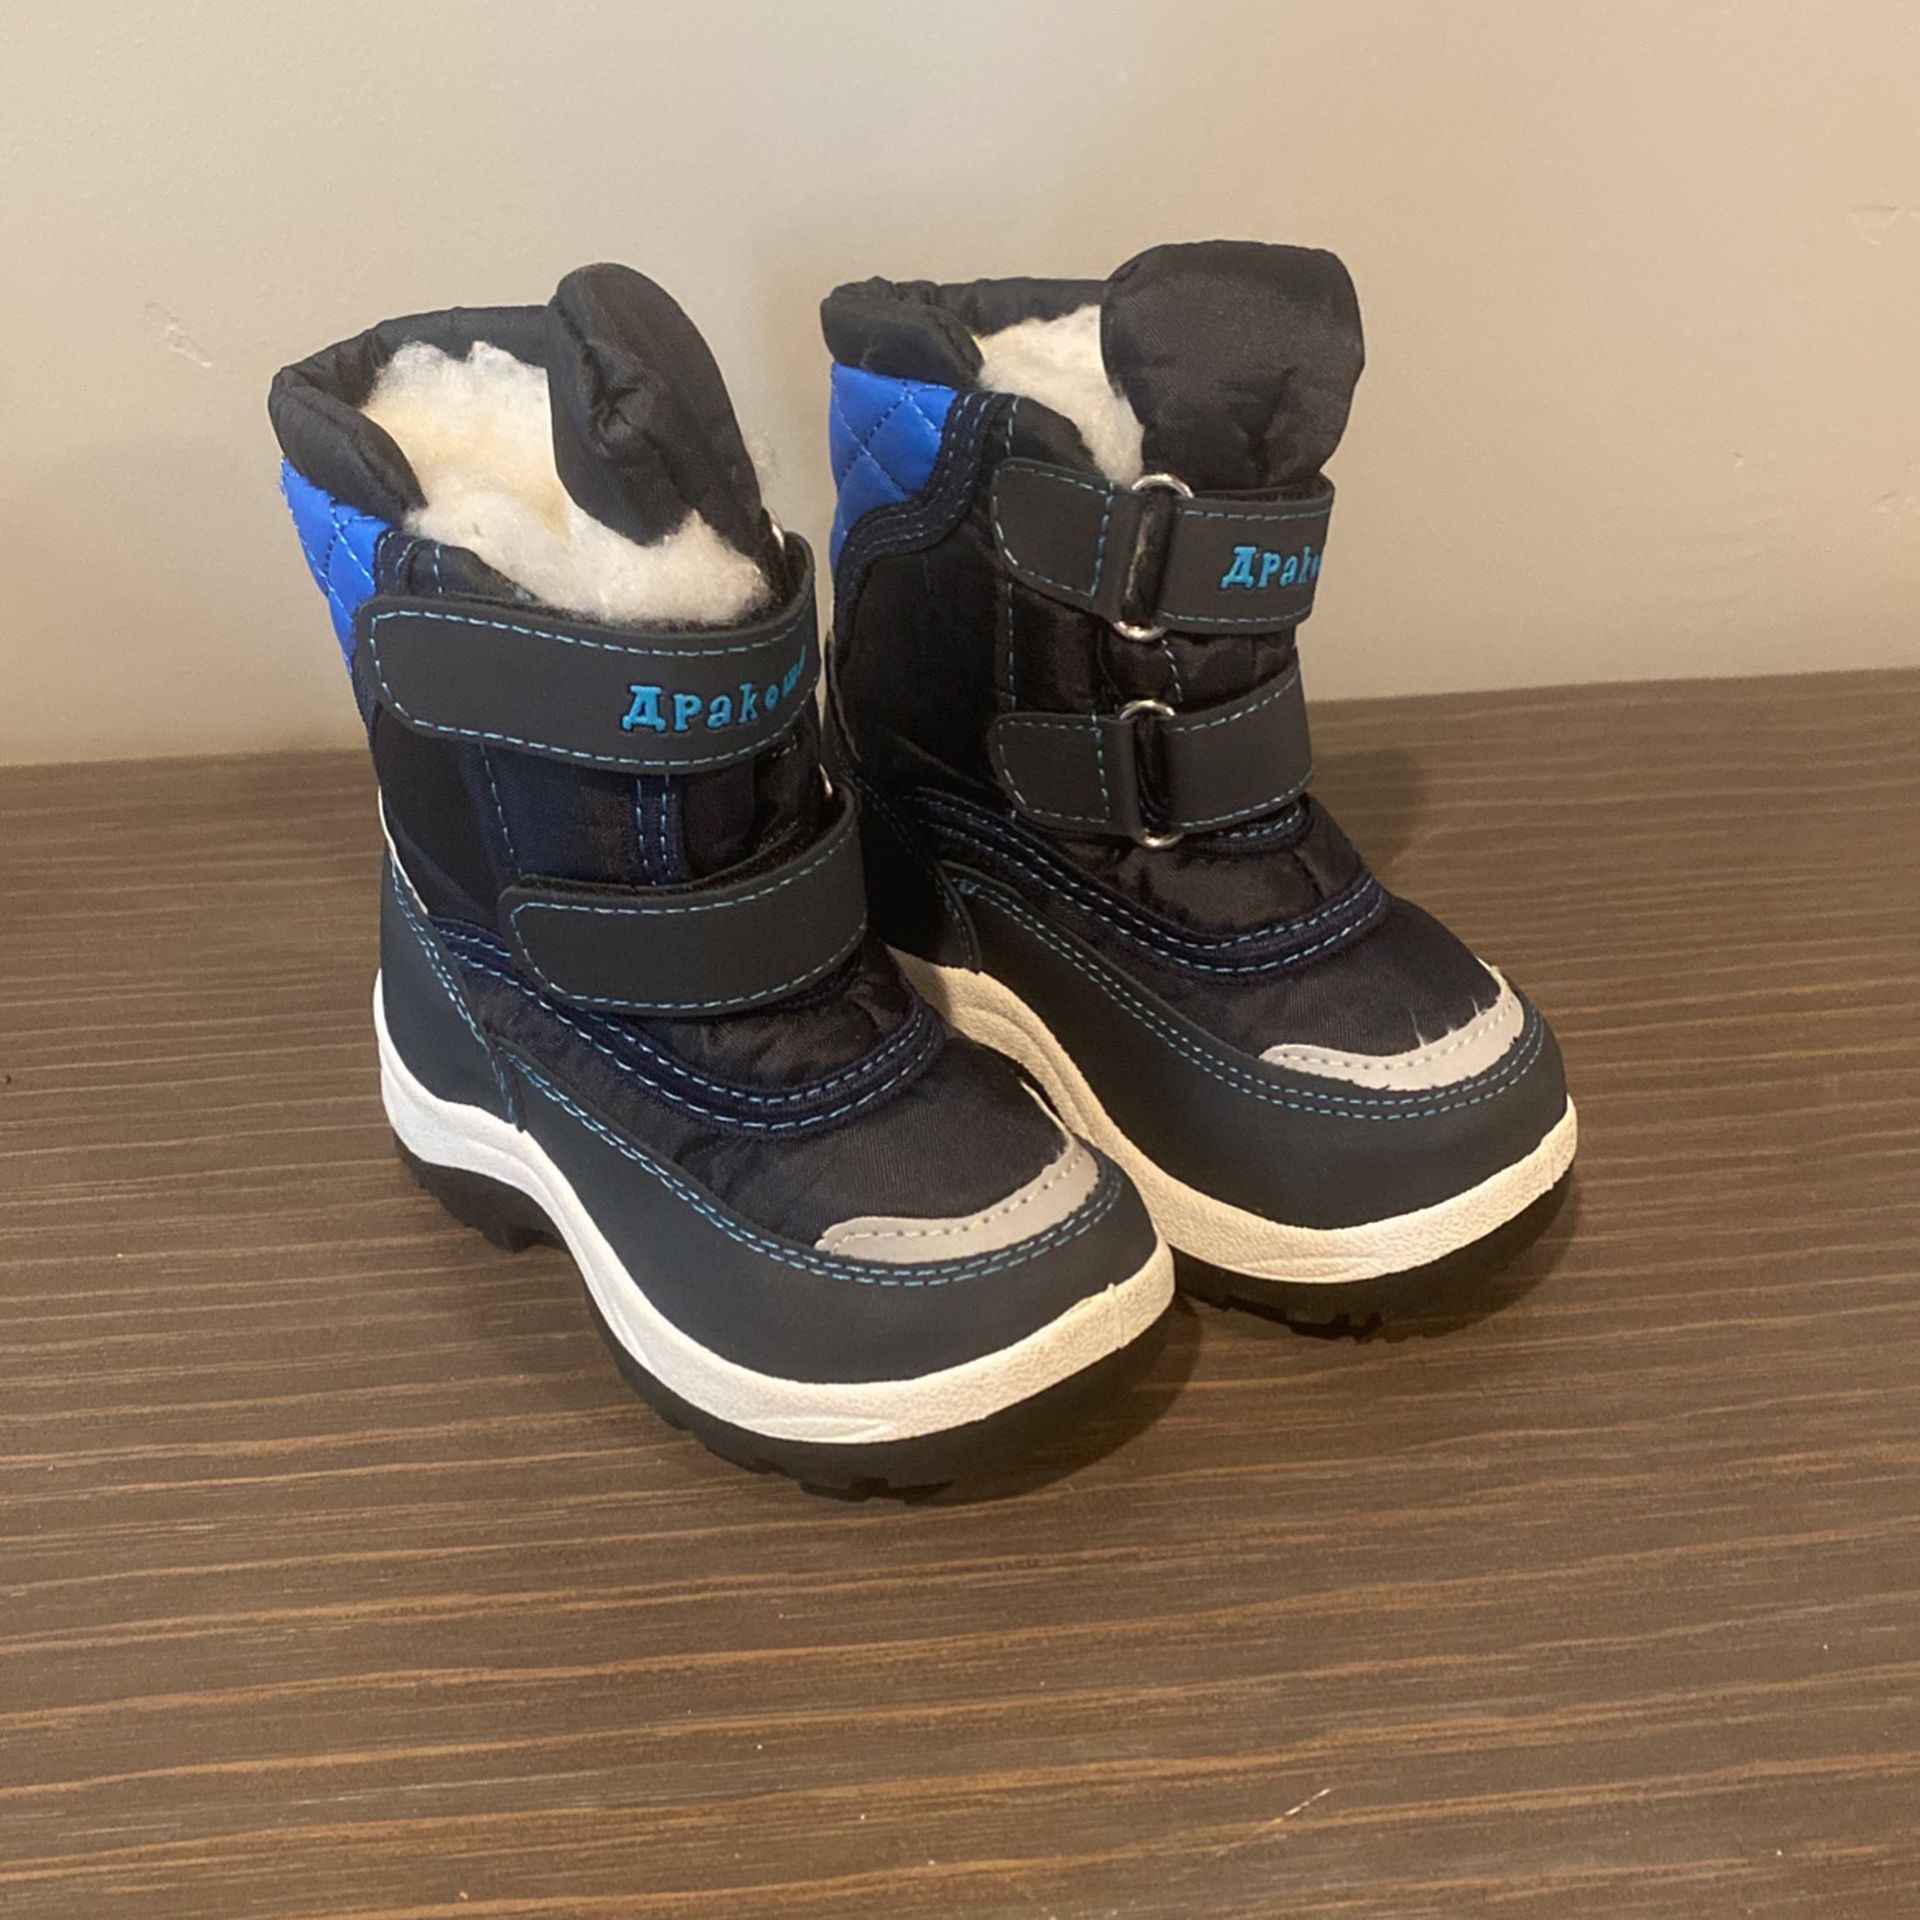 Toddler Snow Boots Size 5